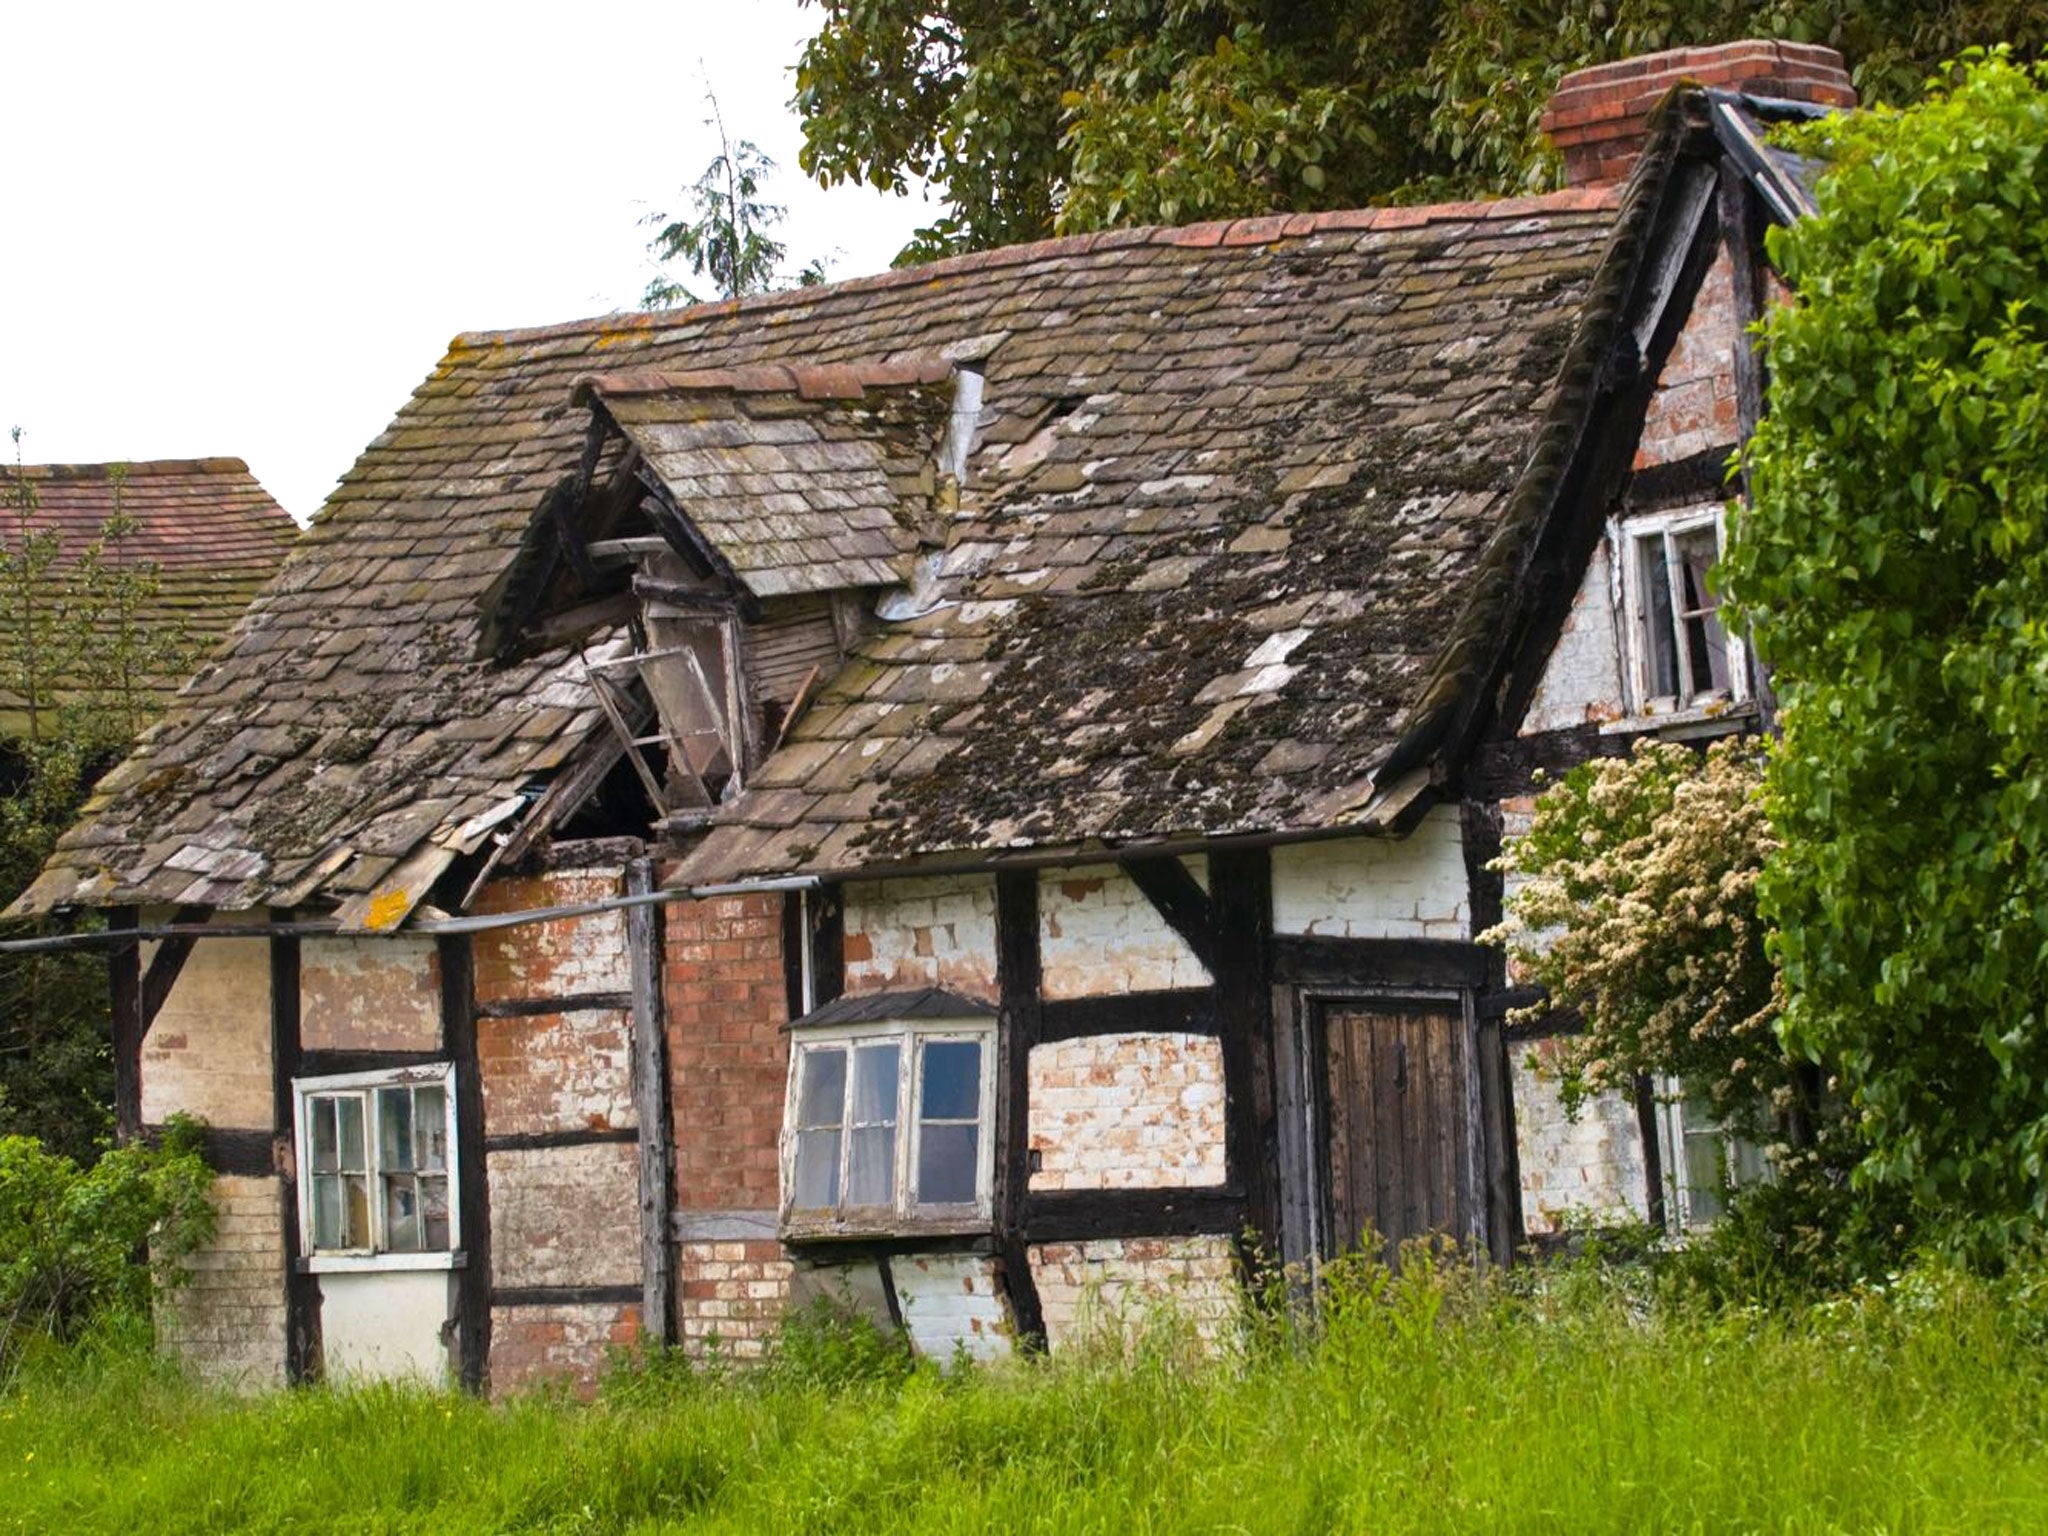 What a waste: spot a derelict property near London and you could earn ?20